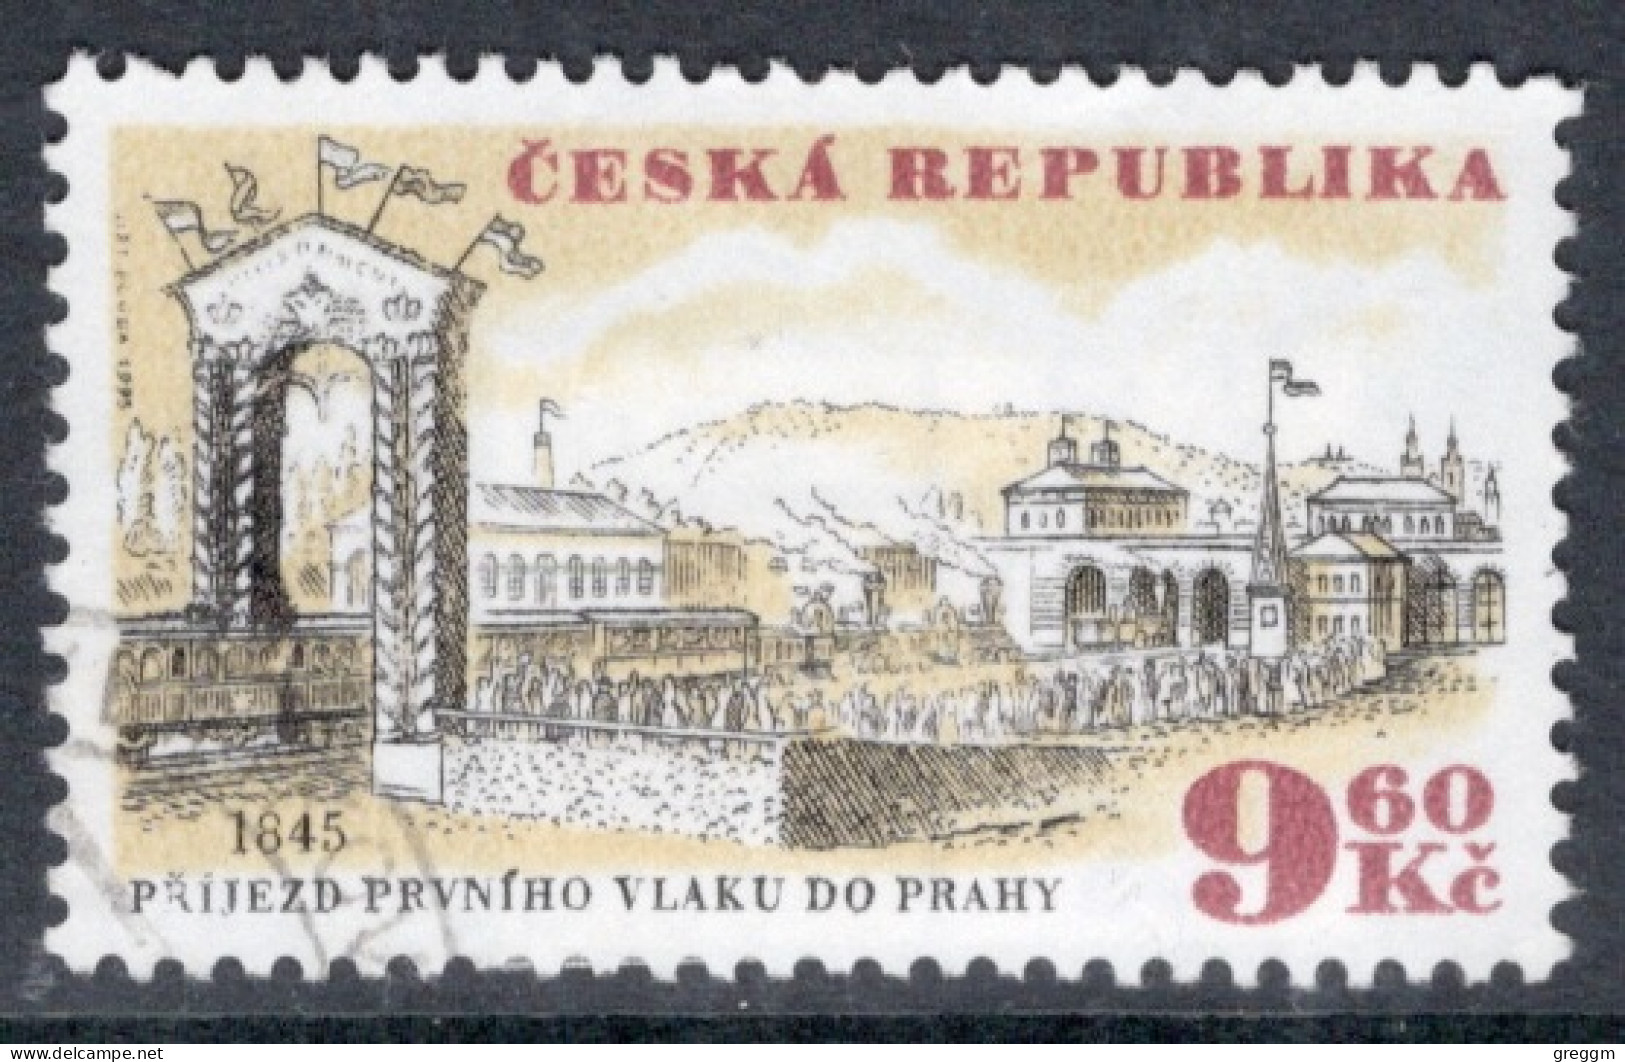 Czech Republic 1995 Single Stamp For The 150th Anniversary Of The Railway Connection Olomouc-Prague In Fine Used - Oblitérés